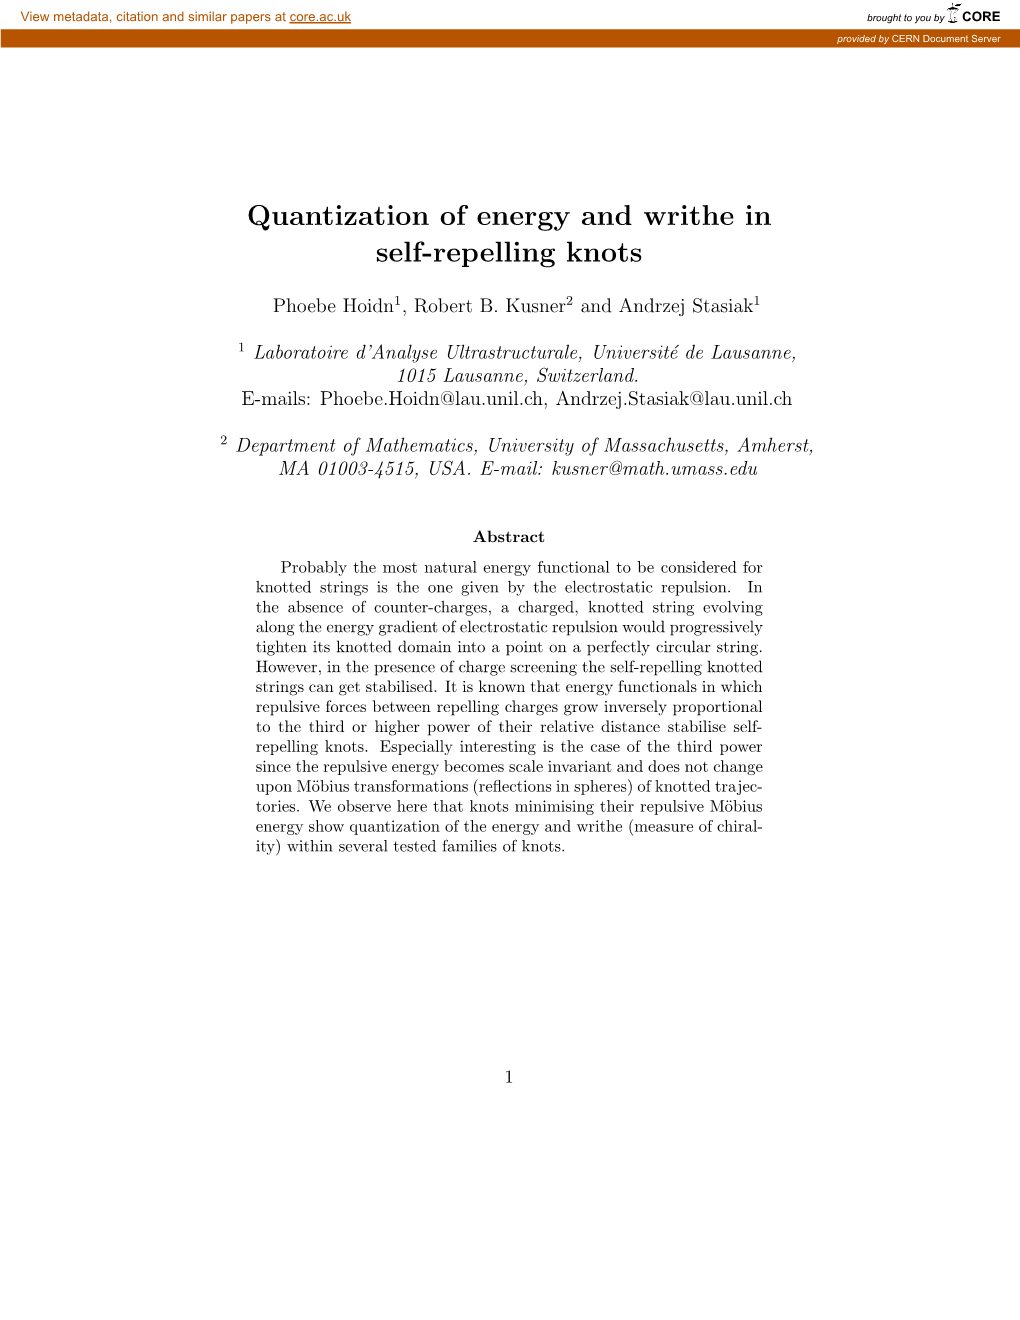 Quantization of Energy and Writhe in Self-Repelling Knots